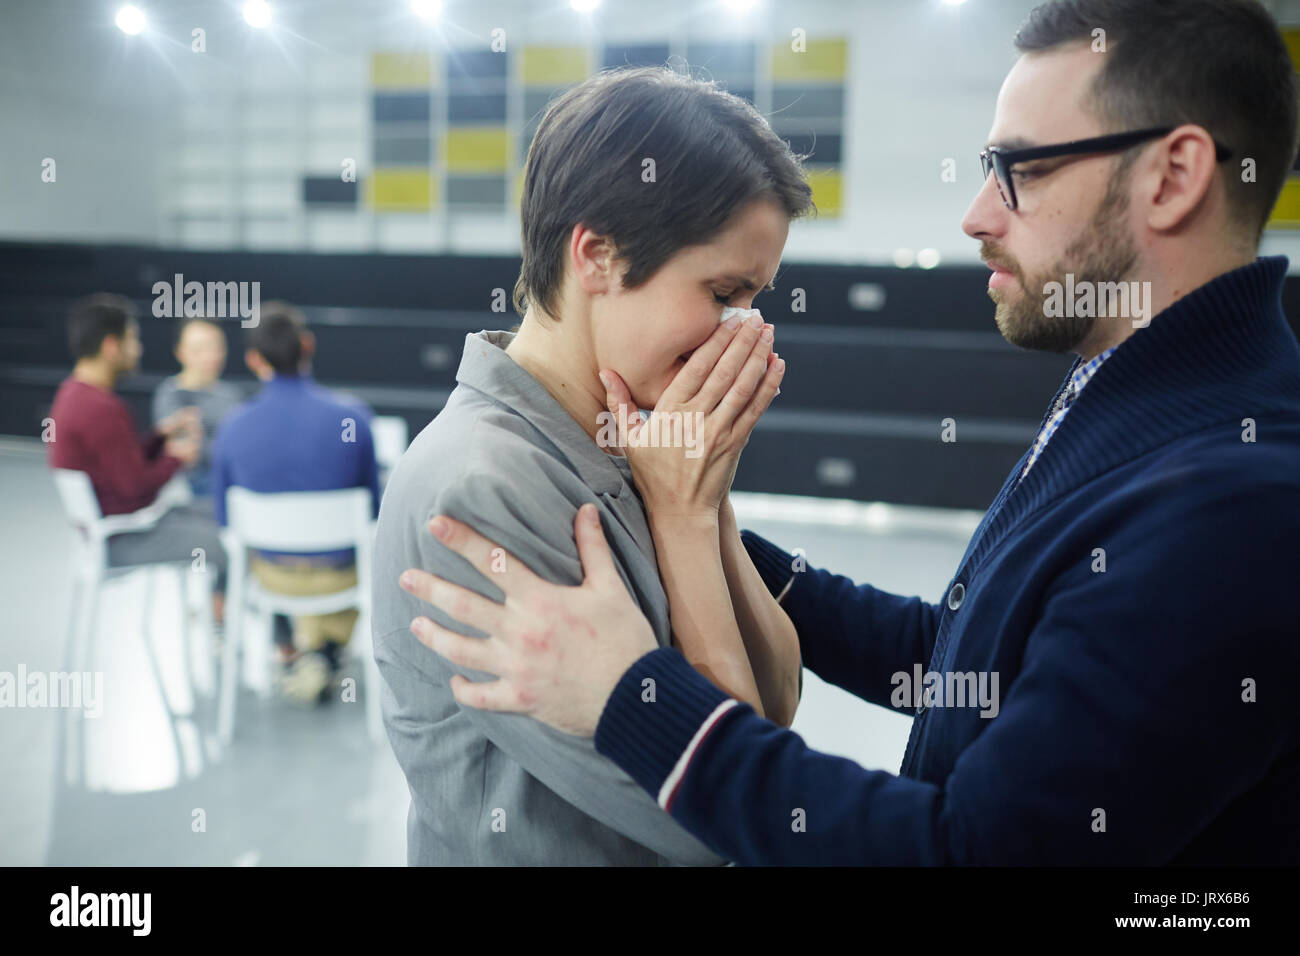 Comforting crying colleague Stock Photo